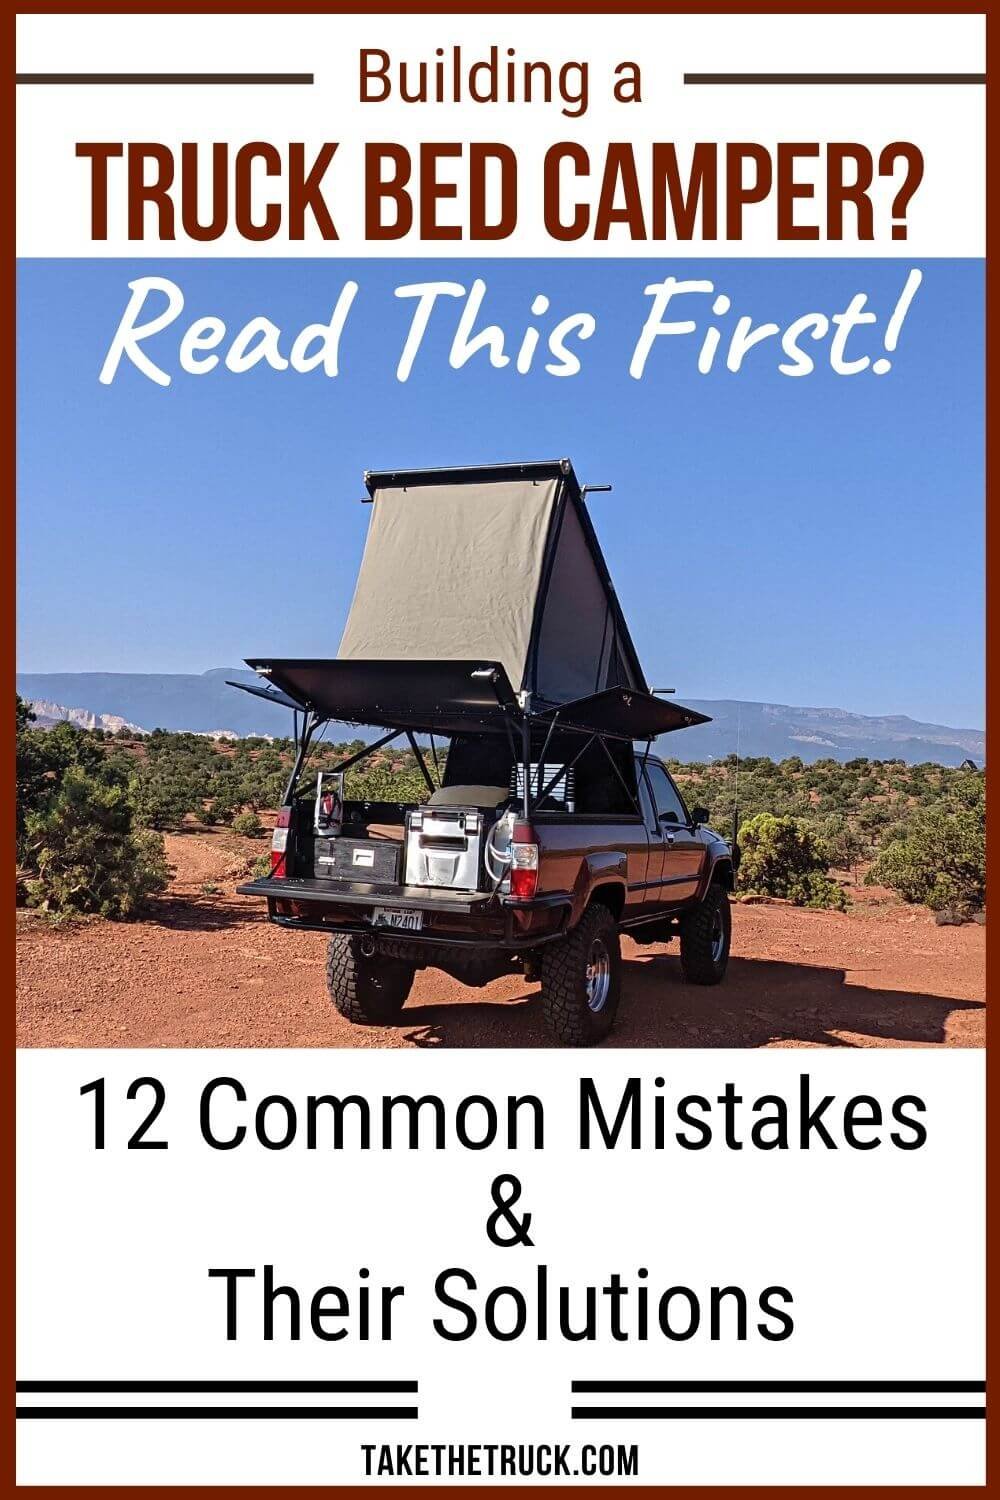 About to build your own truck bed camper? Read this post first for 12 common mistakes you’ll want to avoid in your diy truck bed camper build. Start truck topper camping like a pro!